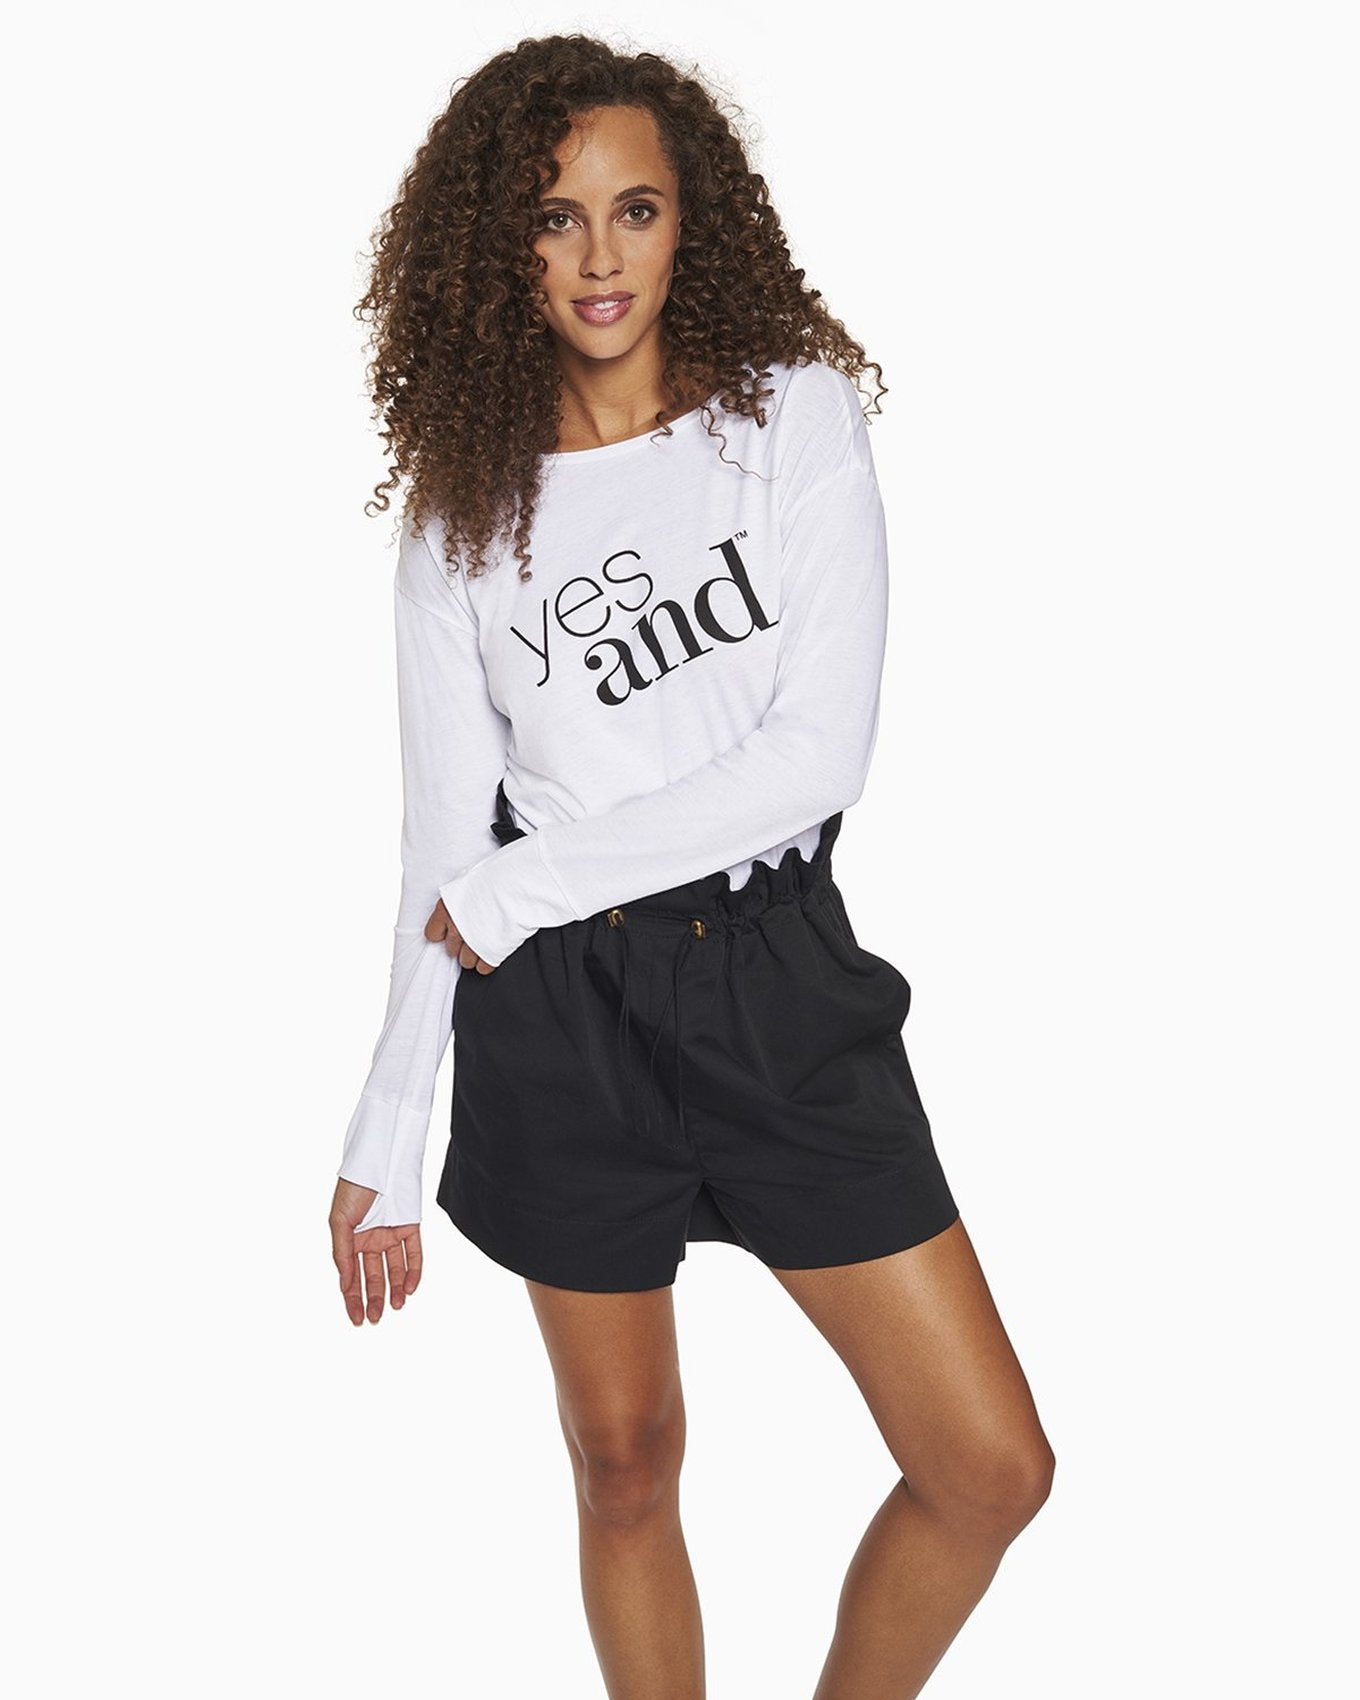 YesAnd Organic Paperbag Shorts Shorts in color Jet Black and shape shorts